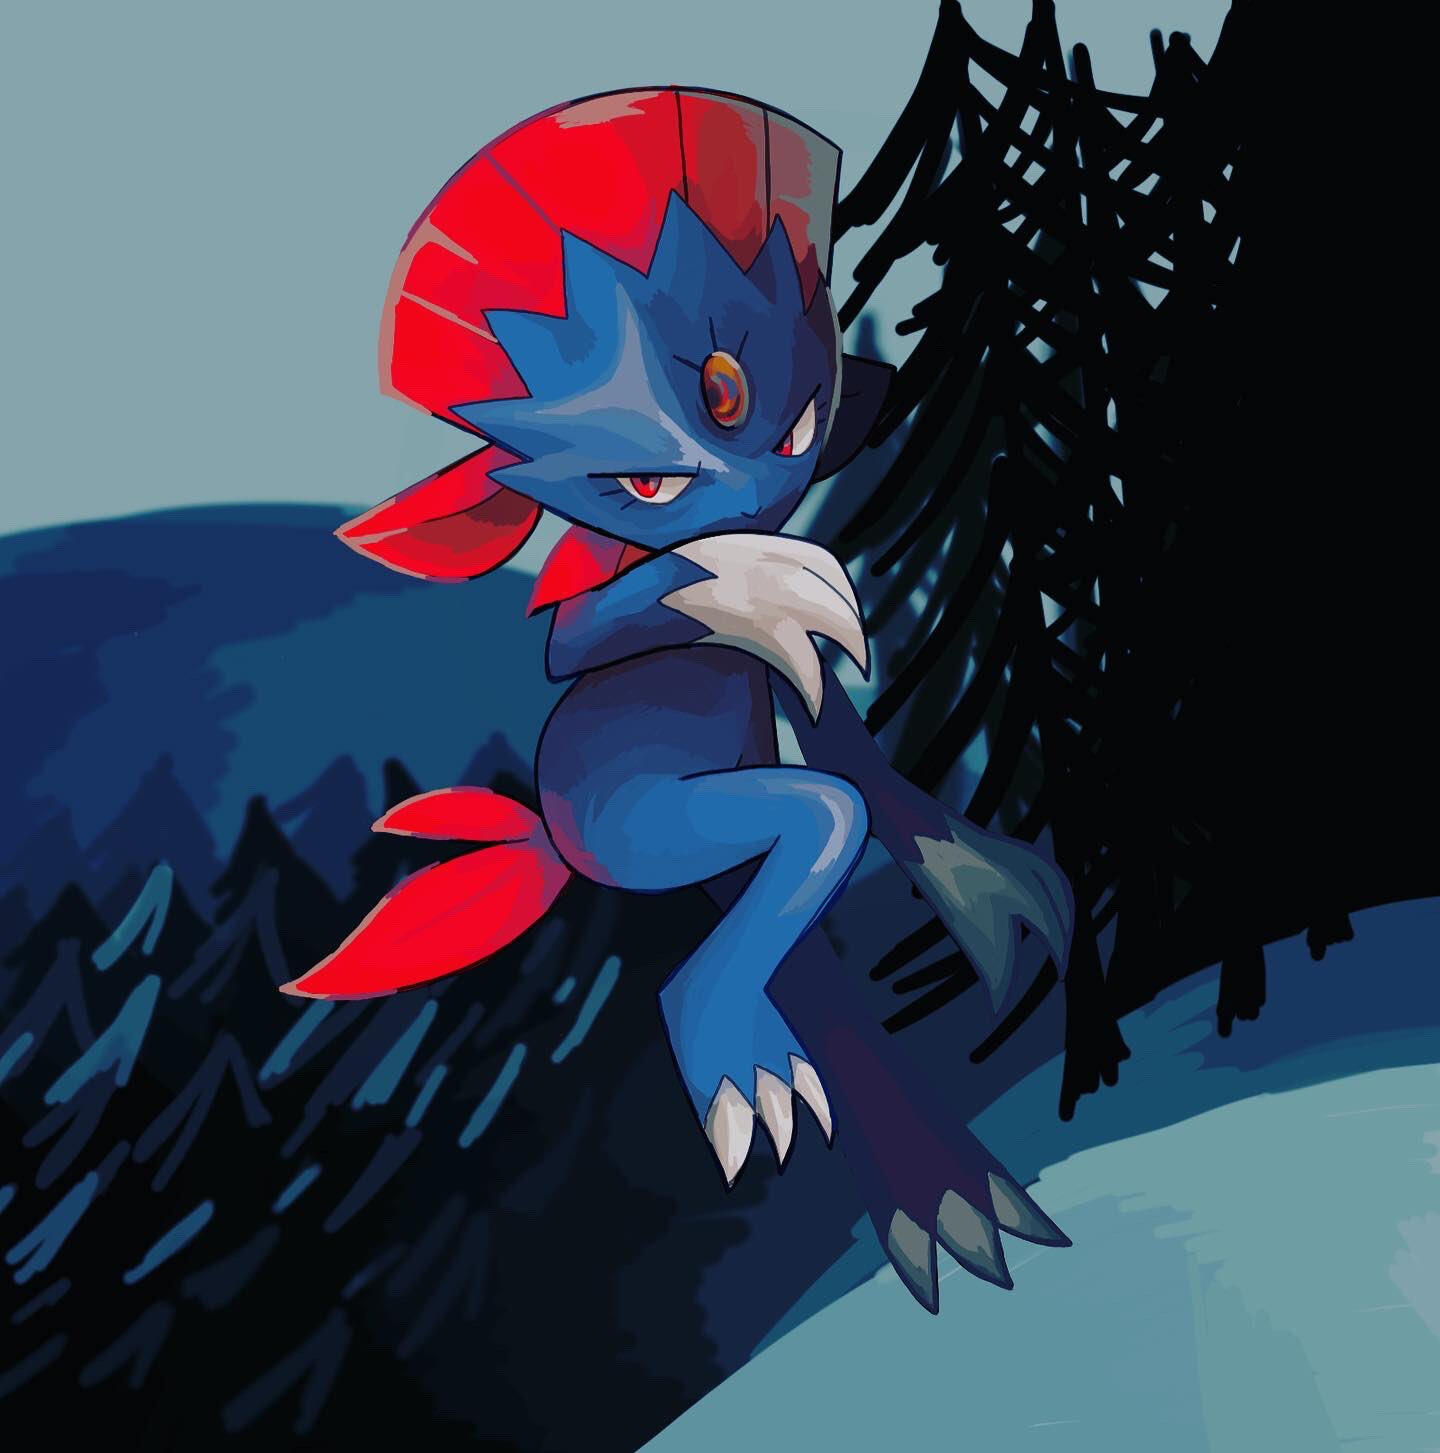 A digital painting done as a commission for a friend of the pokemon weavile, done in 2021.